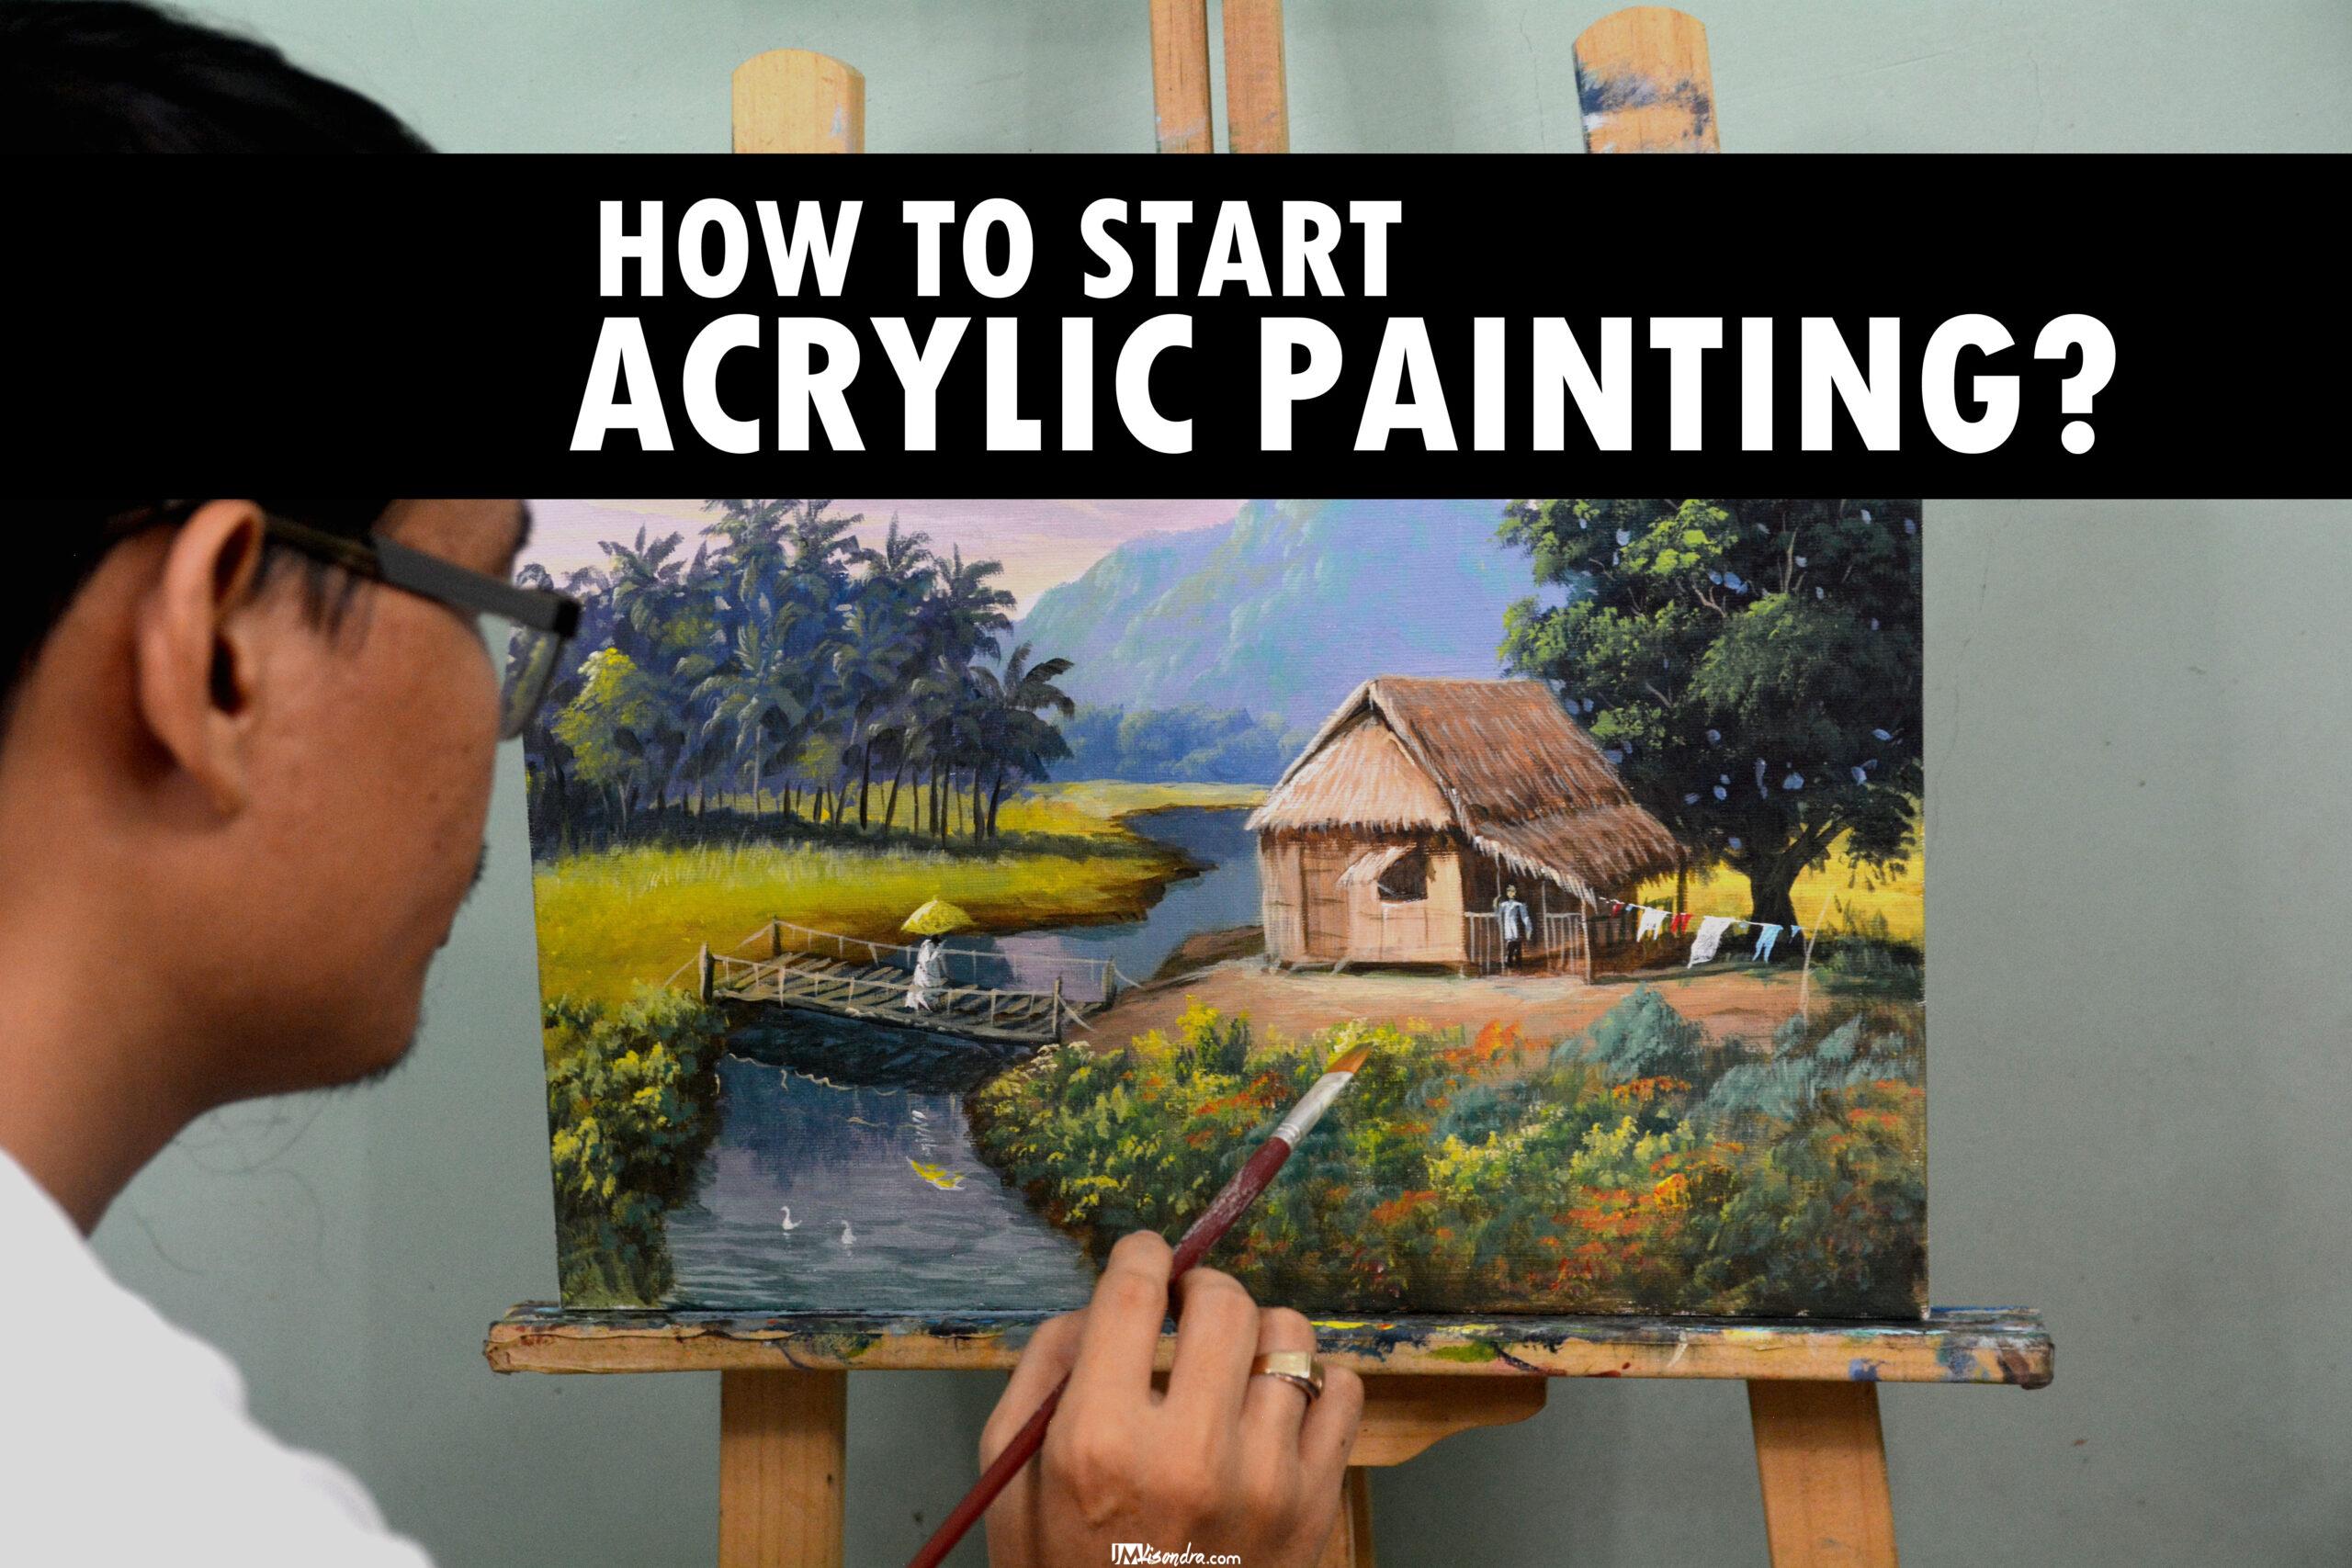 Basic Color Mixing in Acrylic Using 5 Limited Colors by JM Lisondra 